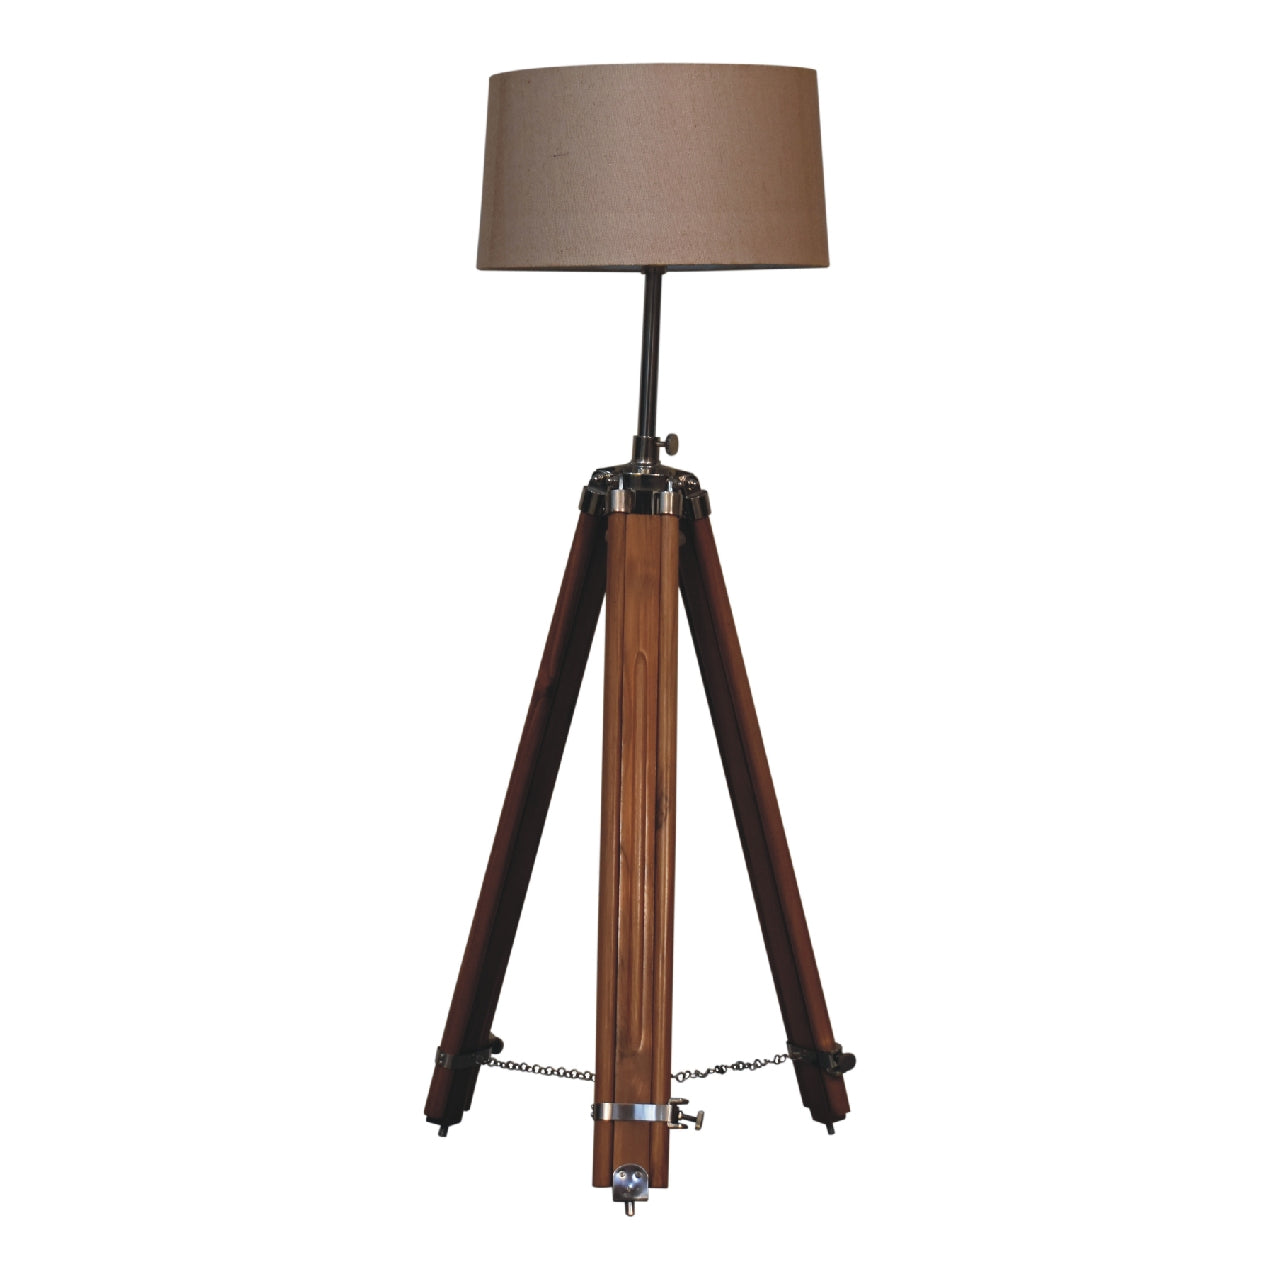 View Chrome Plated and Wooden Teak Floor Lamp information